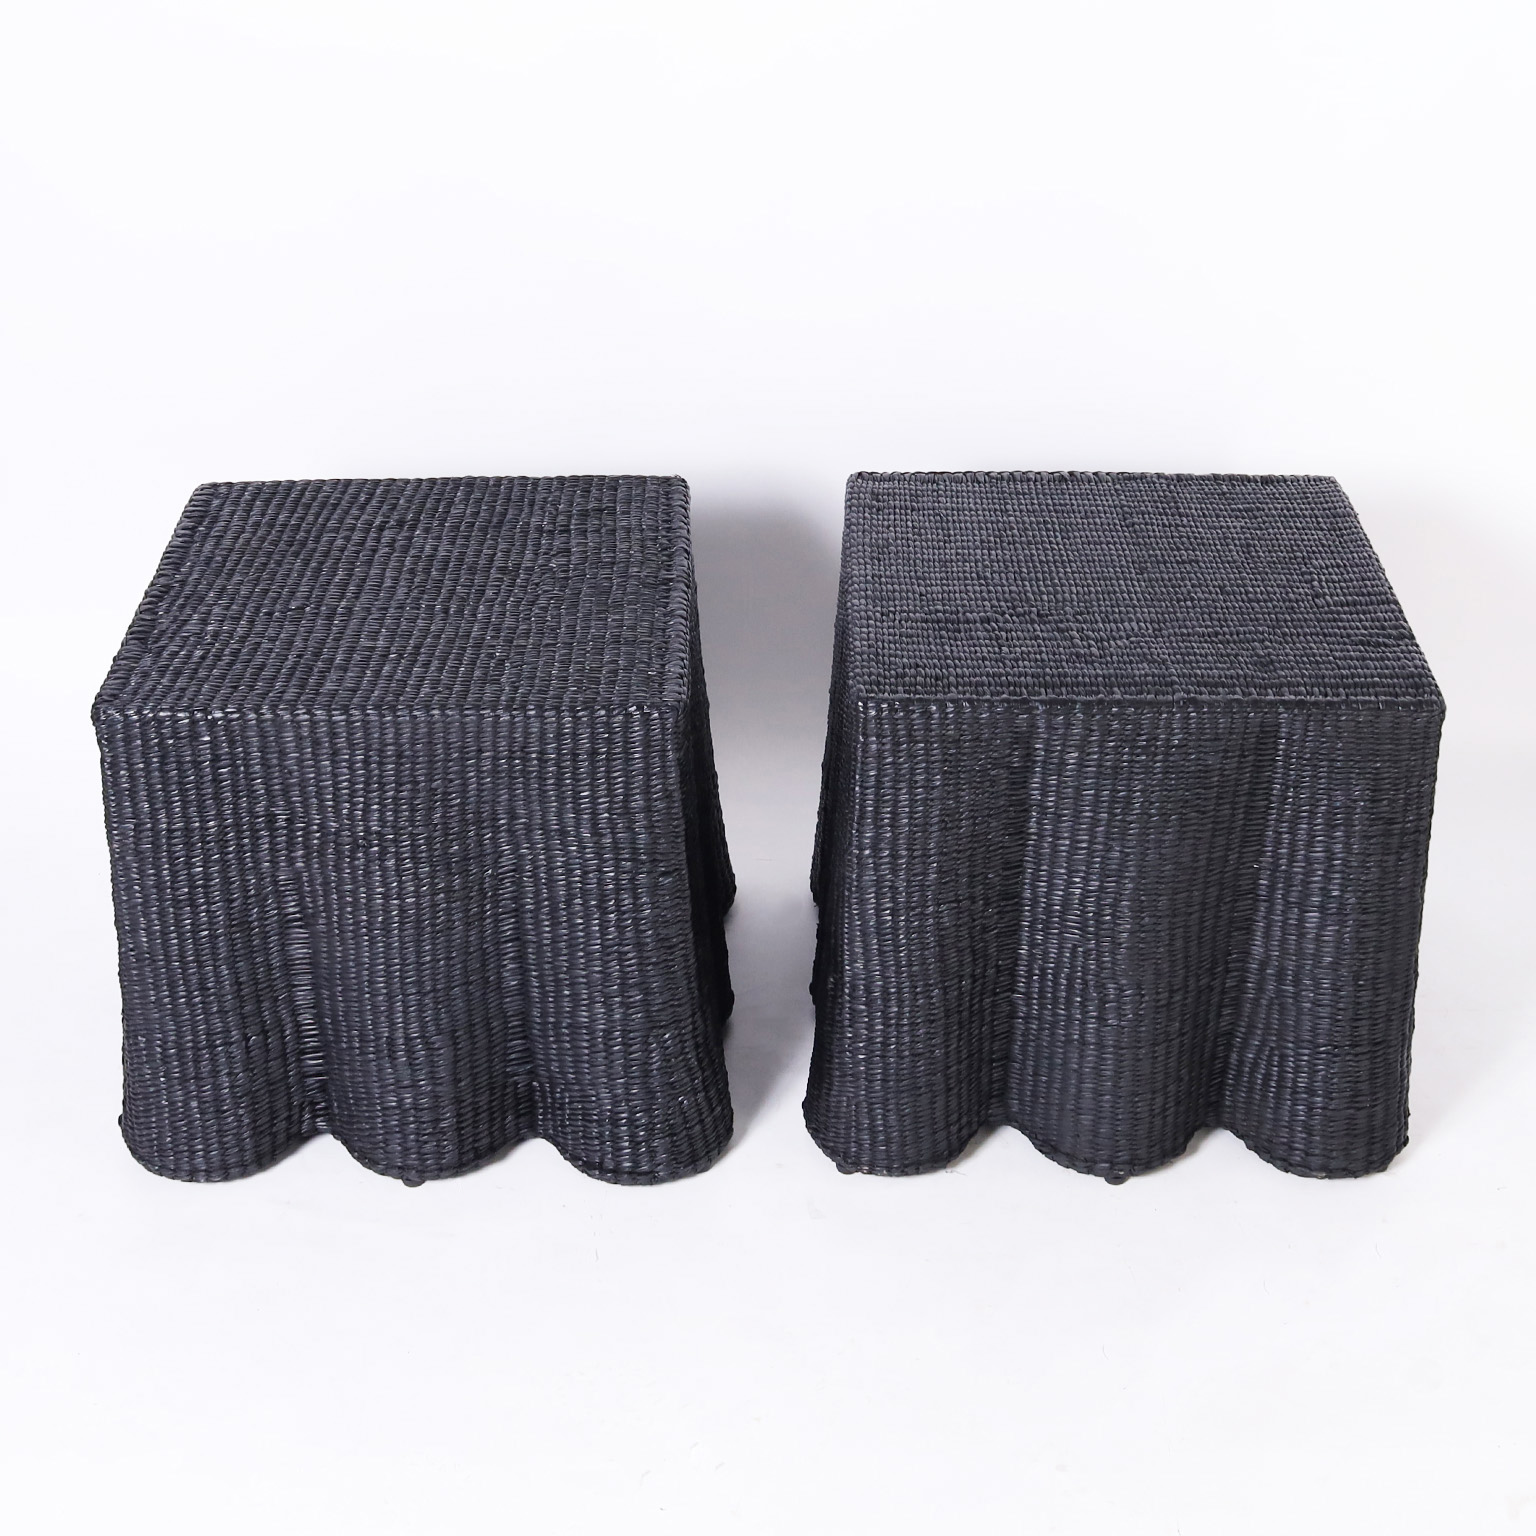 Pair of Black Square Ghost Drapery Stands from the FS Flores Collection